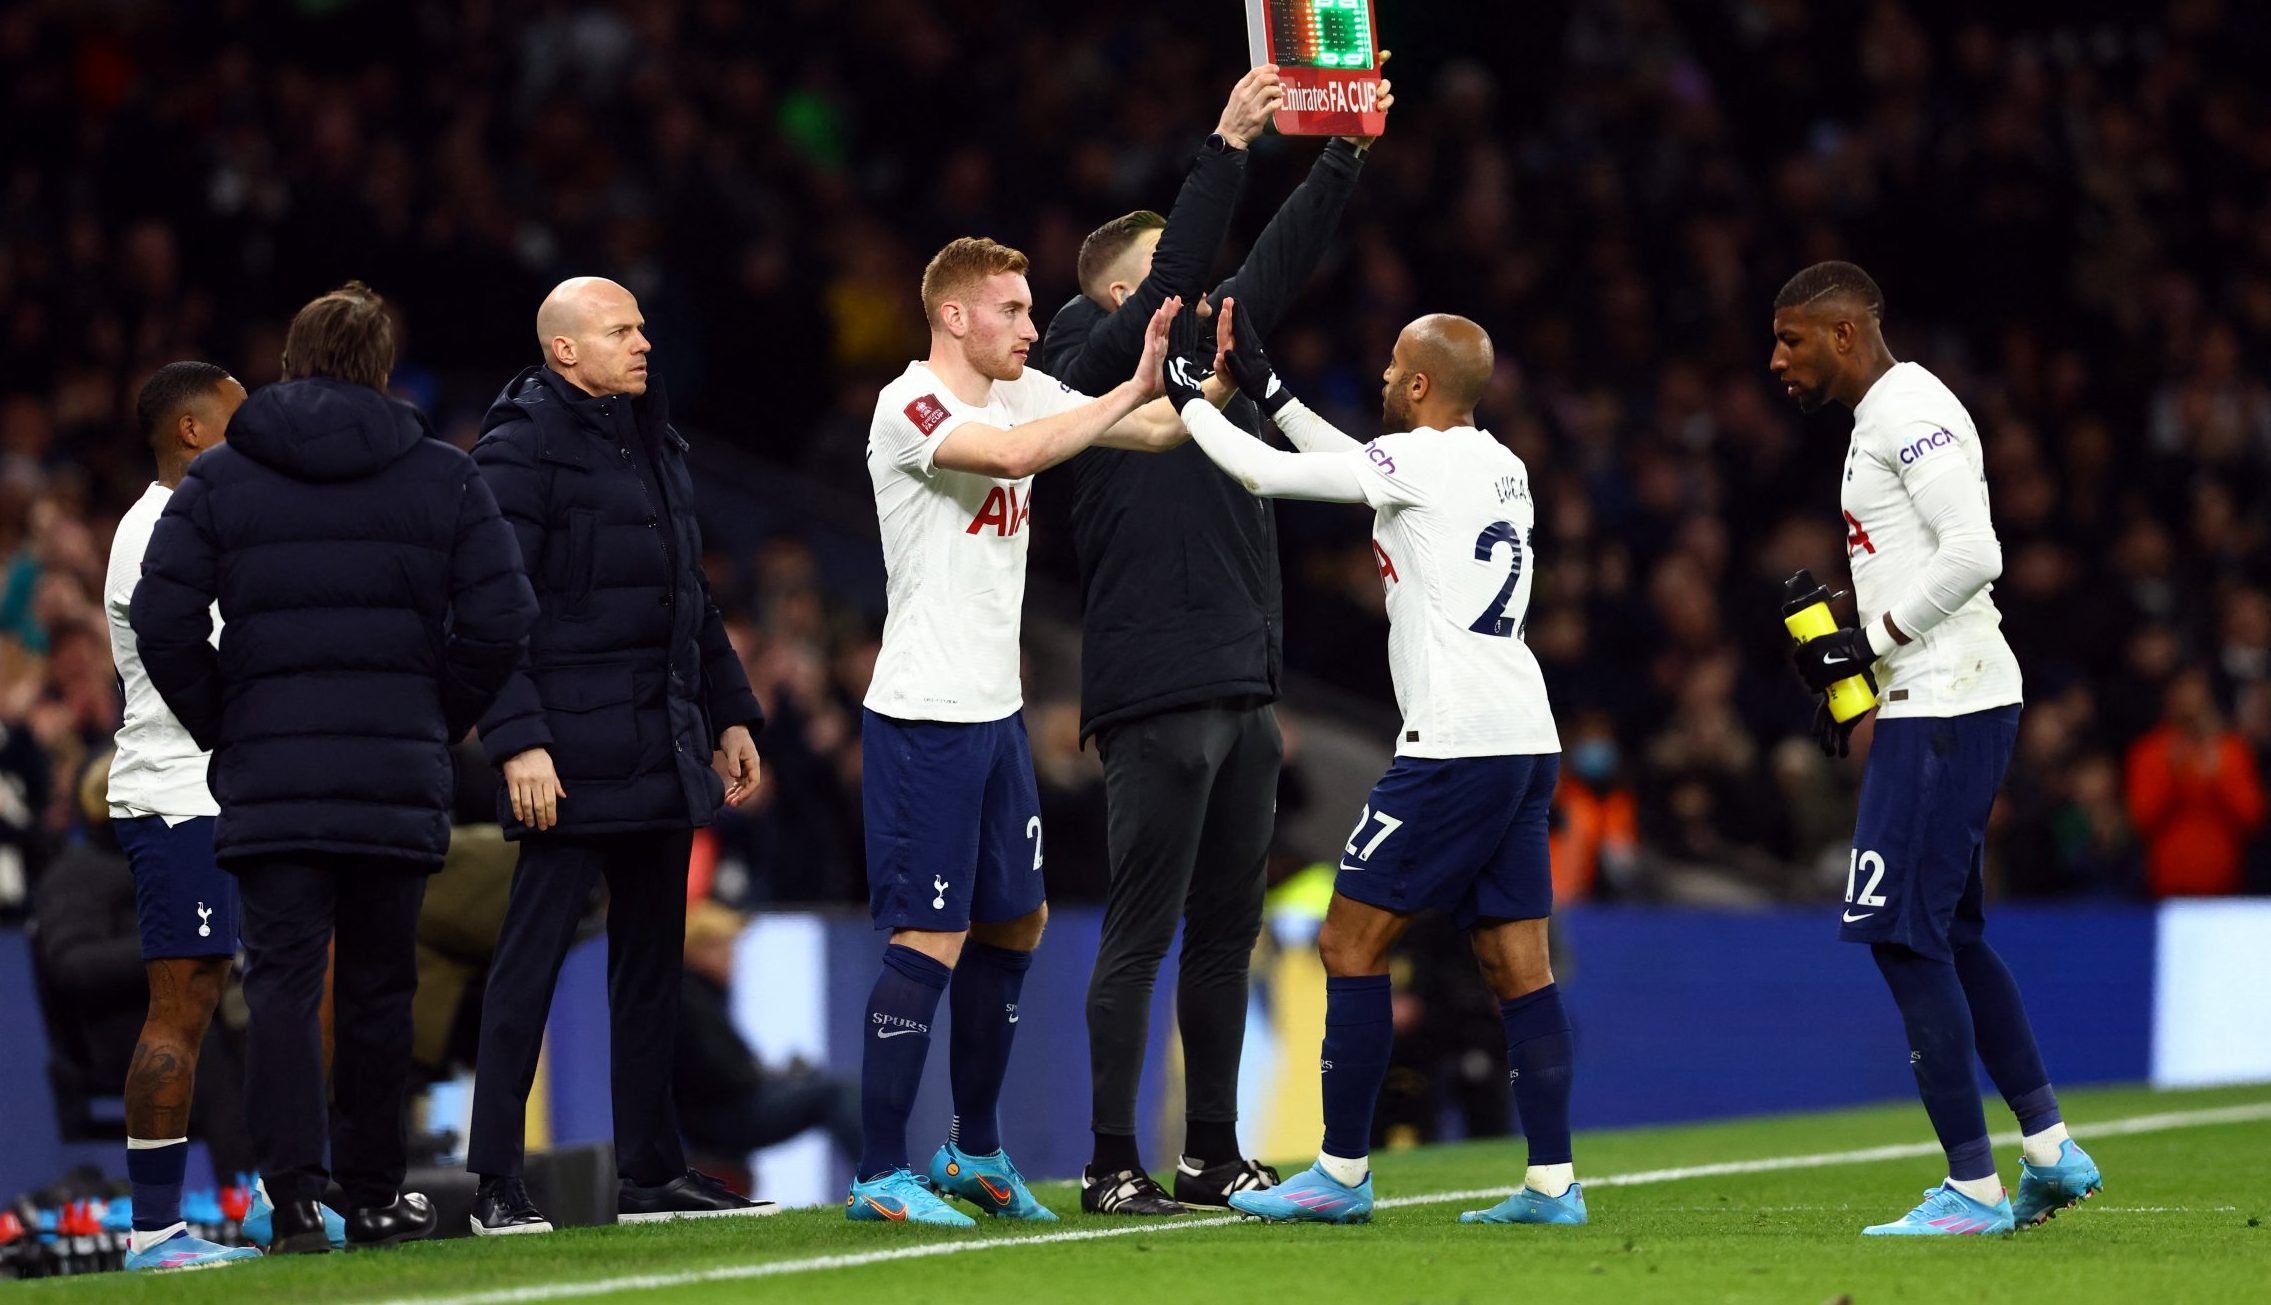 Spurs winger Lucas Moura is subtituted for Dejan Kulusevski vs Brighton in the FA Cup